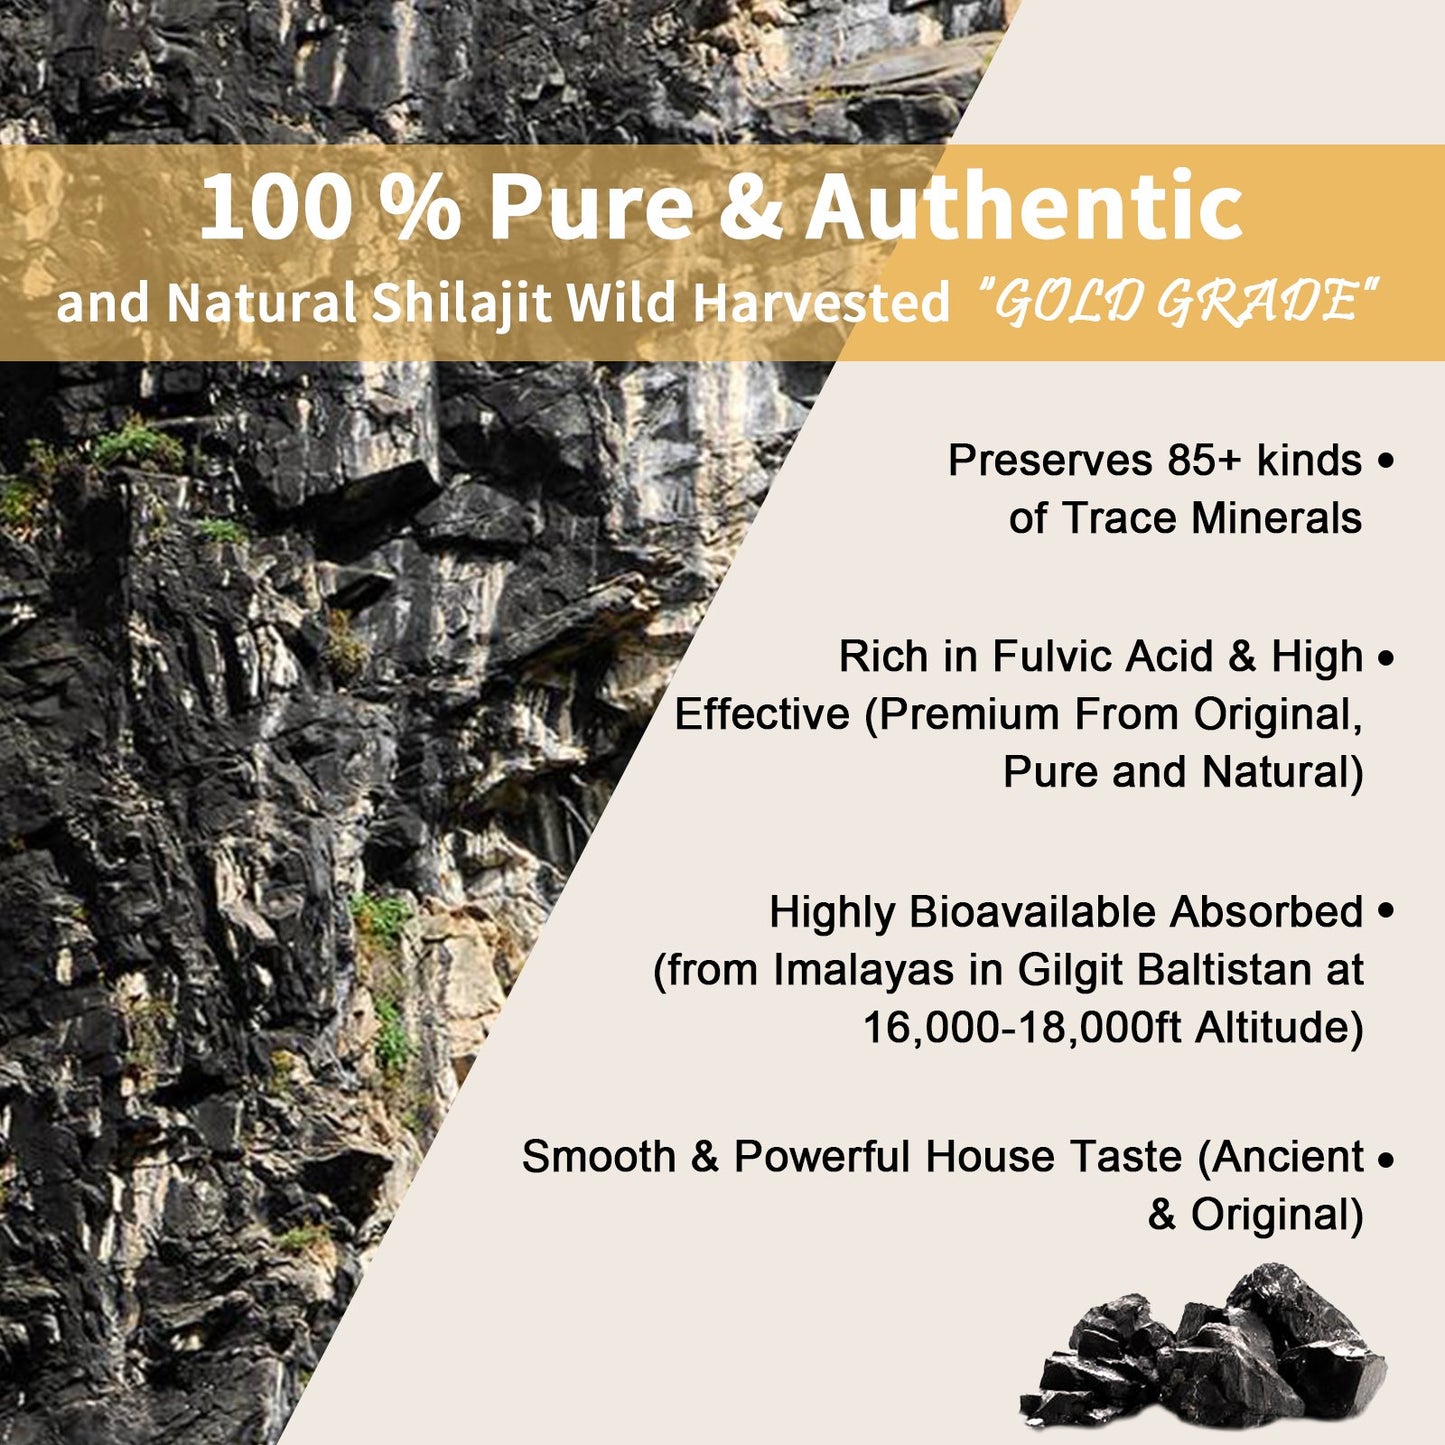 Shilajit Resin 600mg Maximum Potency - Pure & Ancient Extracts from The Himalayas with 85+ Trace Minerals & 75% Fulvic Acid - Natural Resin Gel, 100 Servings / 60g w/ 2 Wood